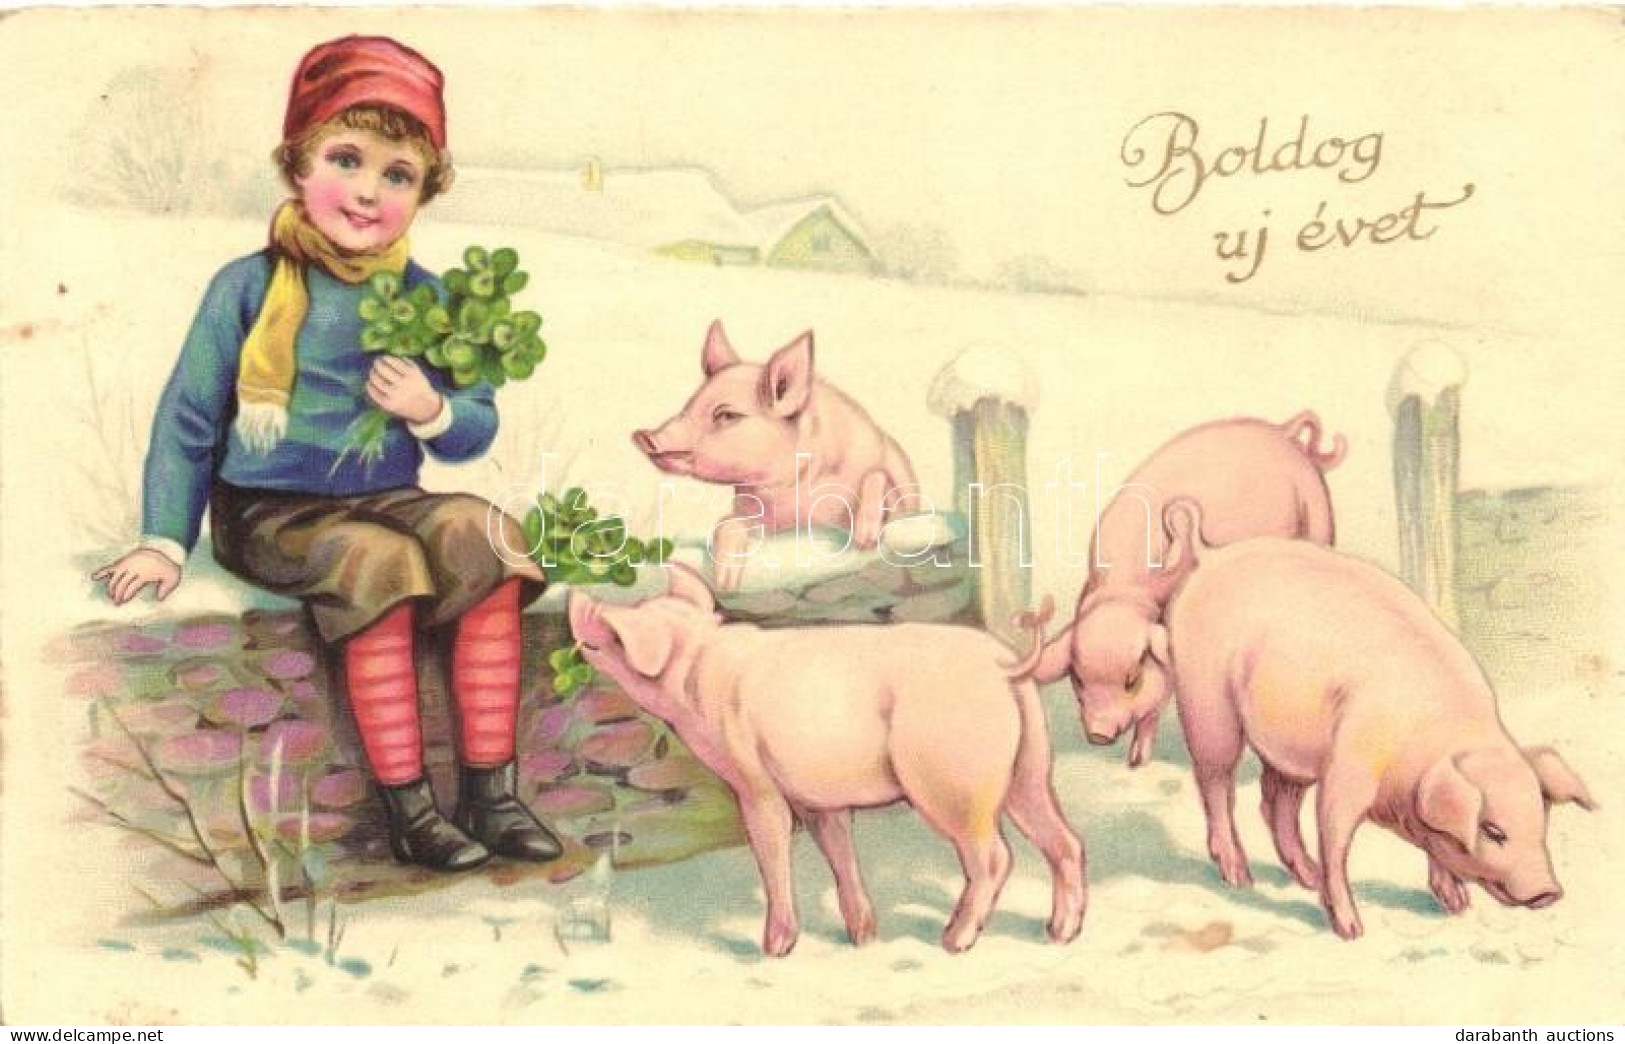 T2 New Year, Boy, Pigs, Clover, Amag 4054. Litho - Zonder Classificatie